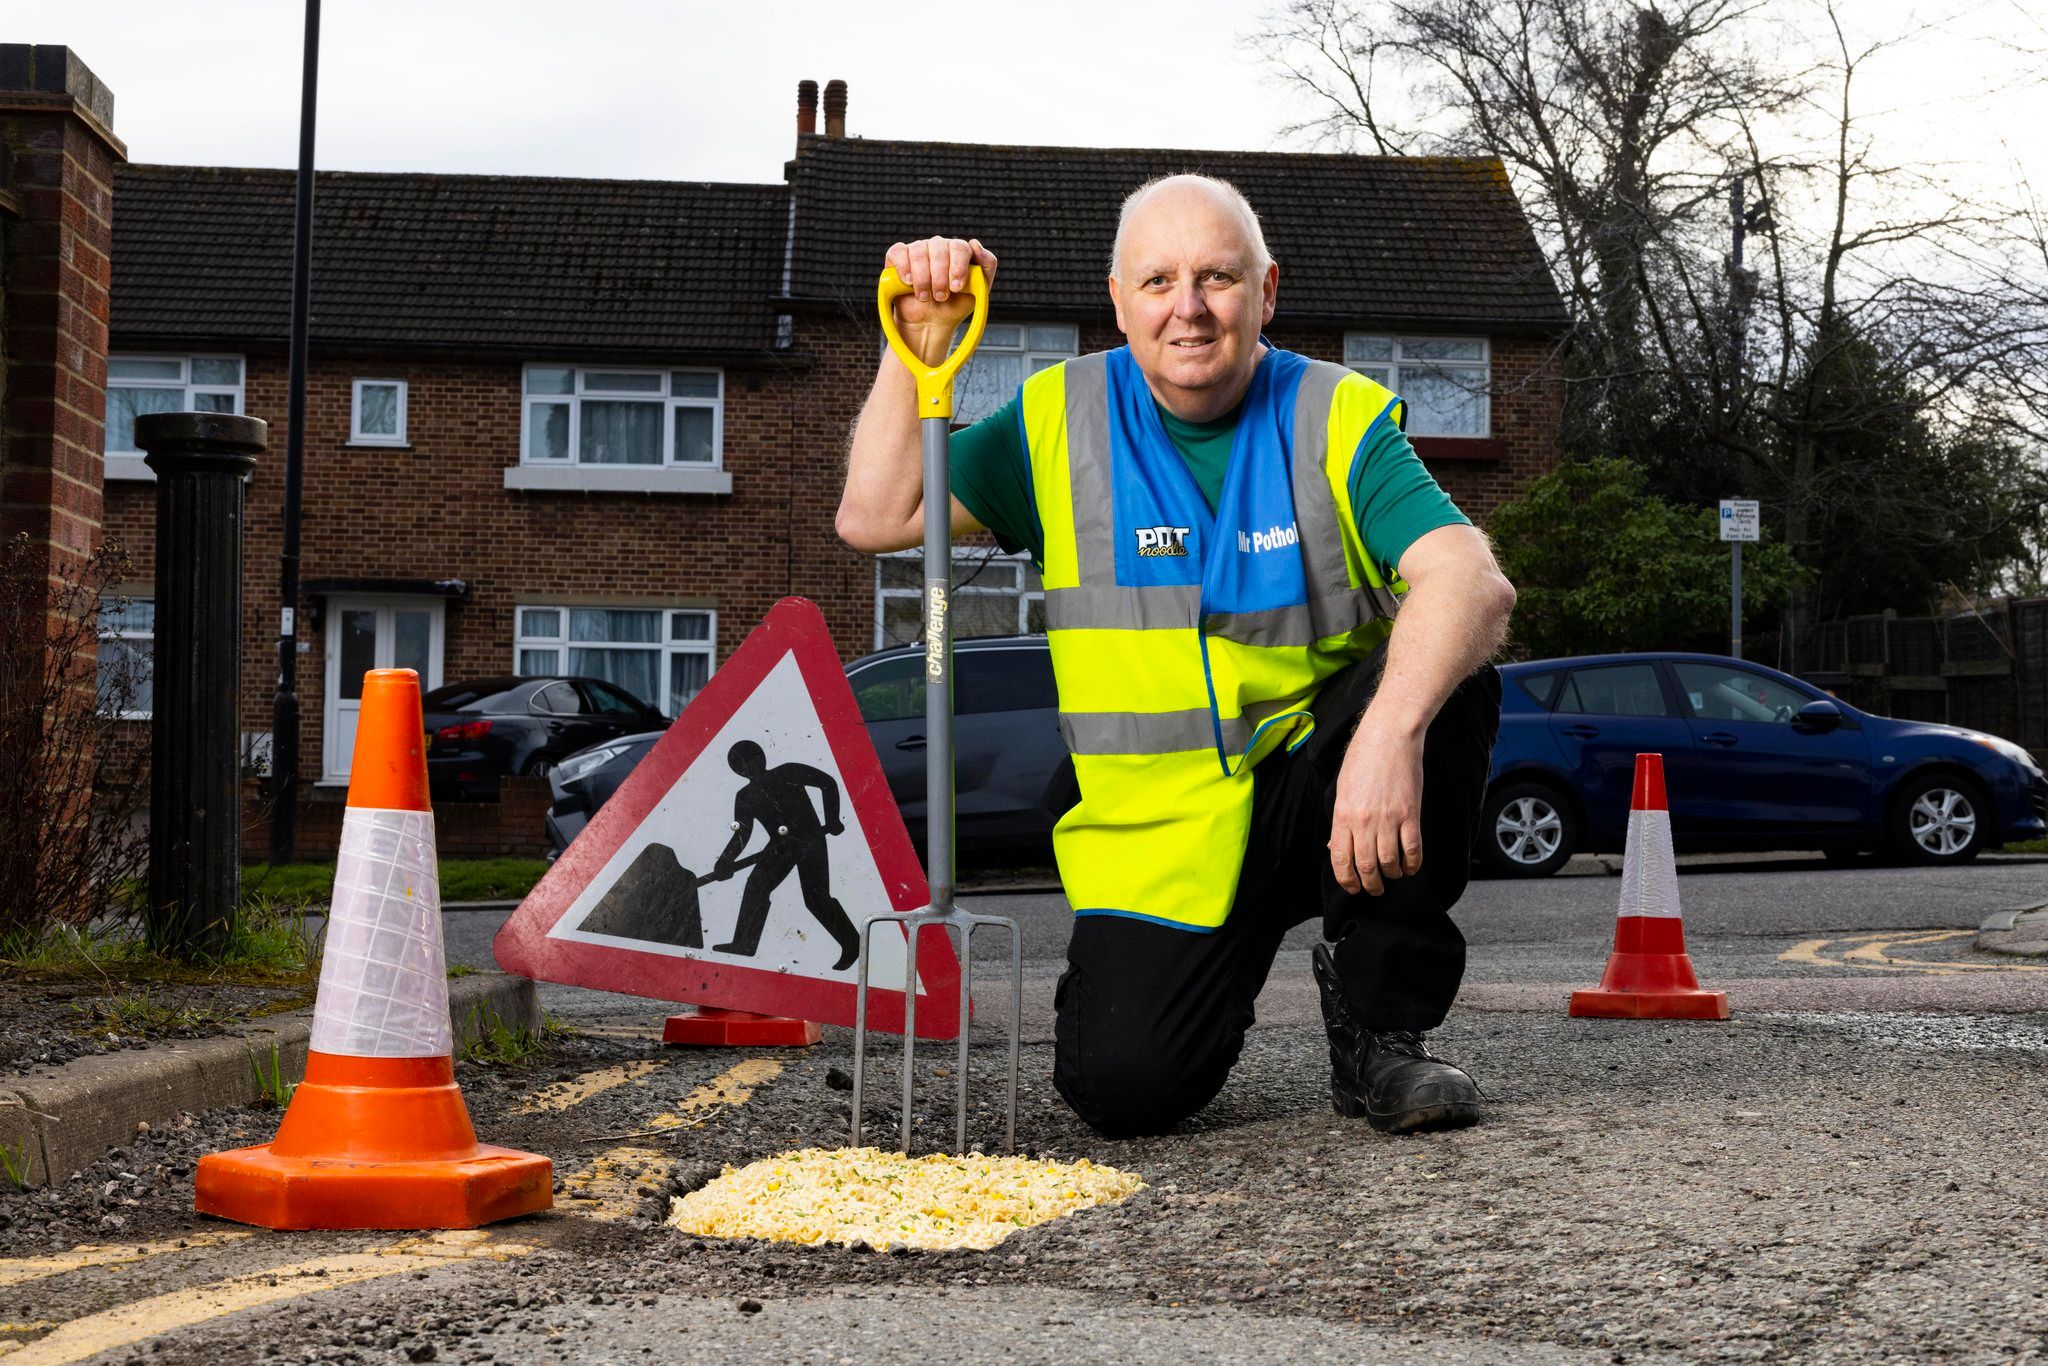 UK man fills potholes with pot noodles to highlight the state of the roads there